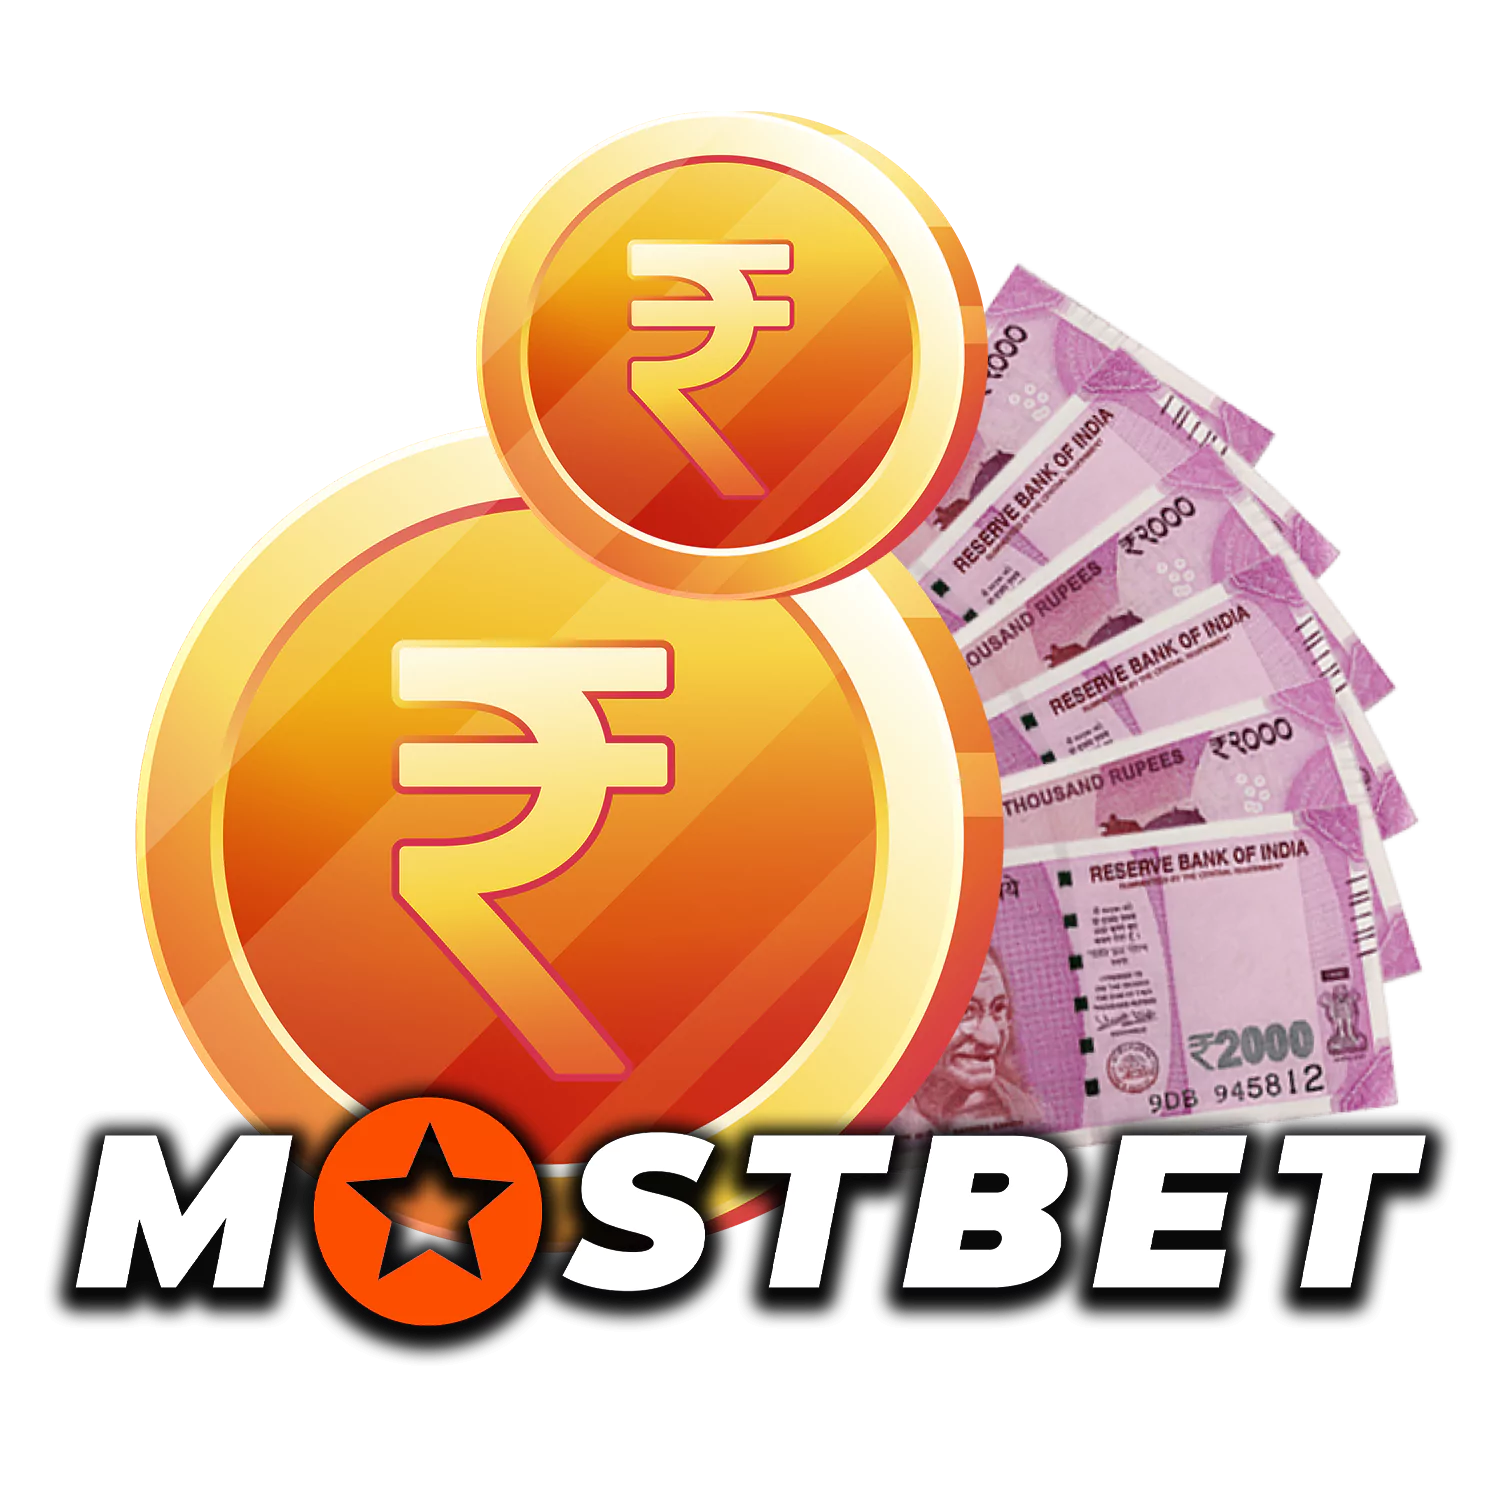 Solid Reasons To Avoid Mostbet-AZ91 bookmaker and casino in Azerbaijan